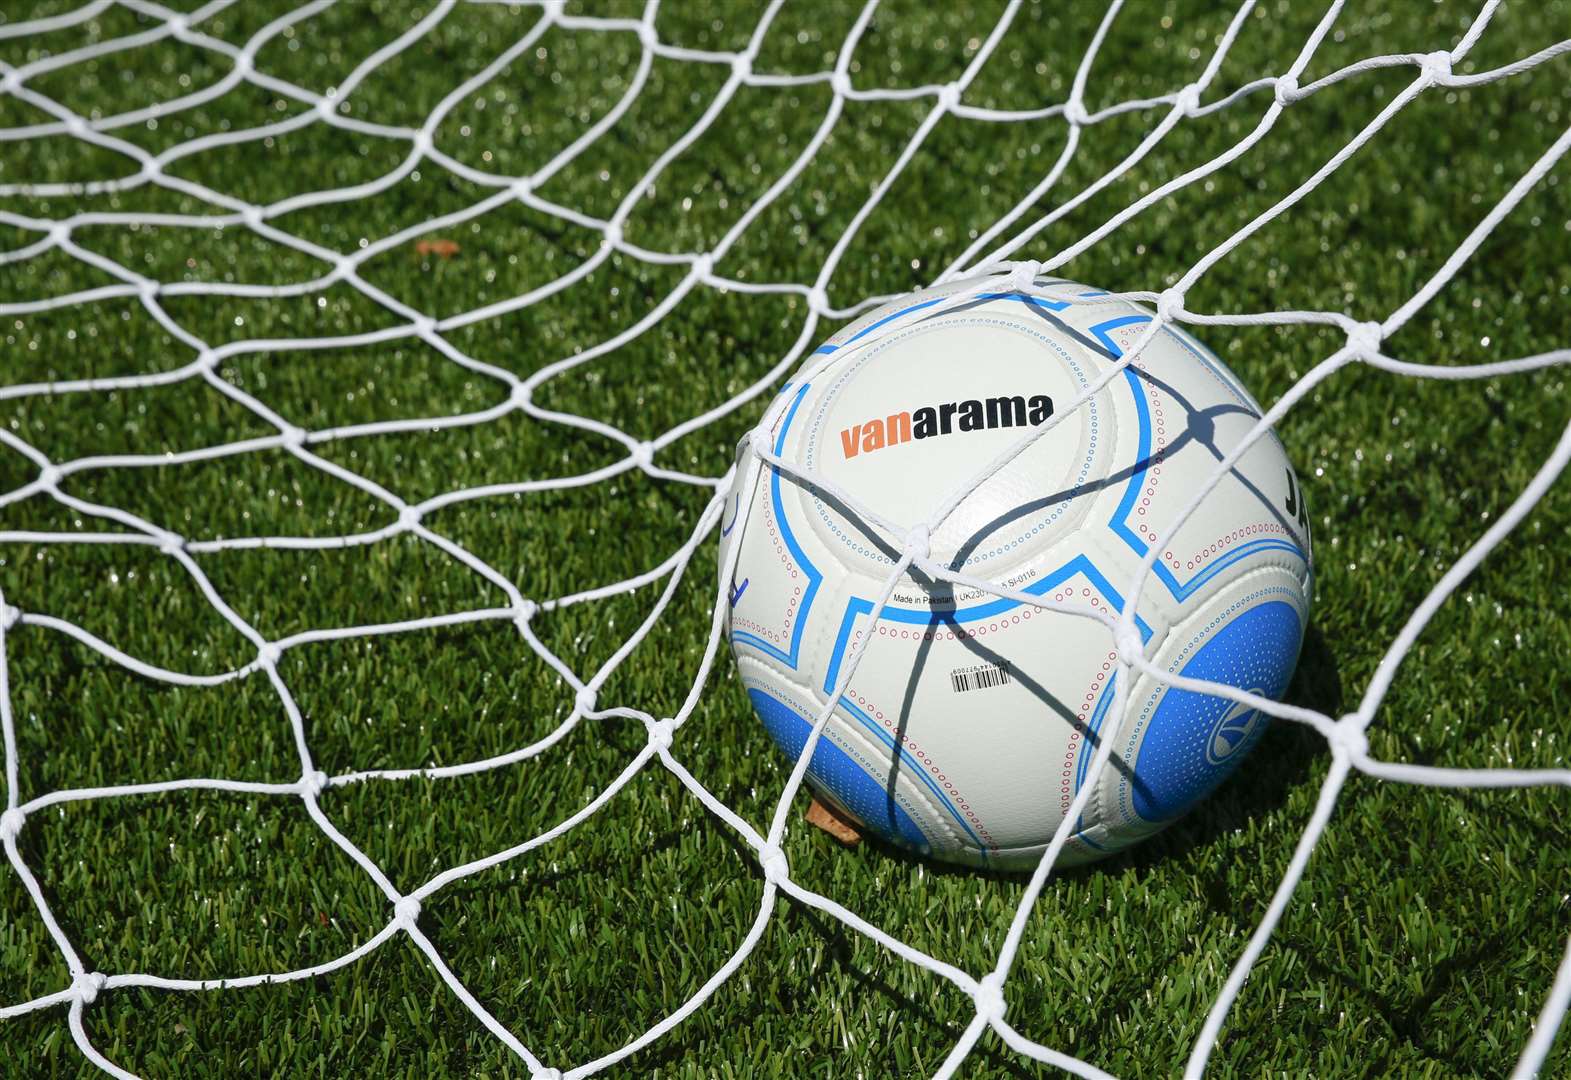 Football fixtures and results - Friday August 24 to Wednesday August 29